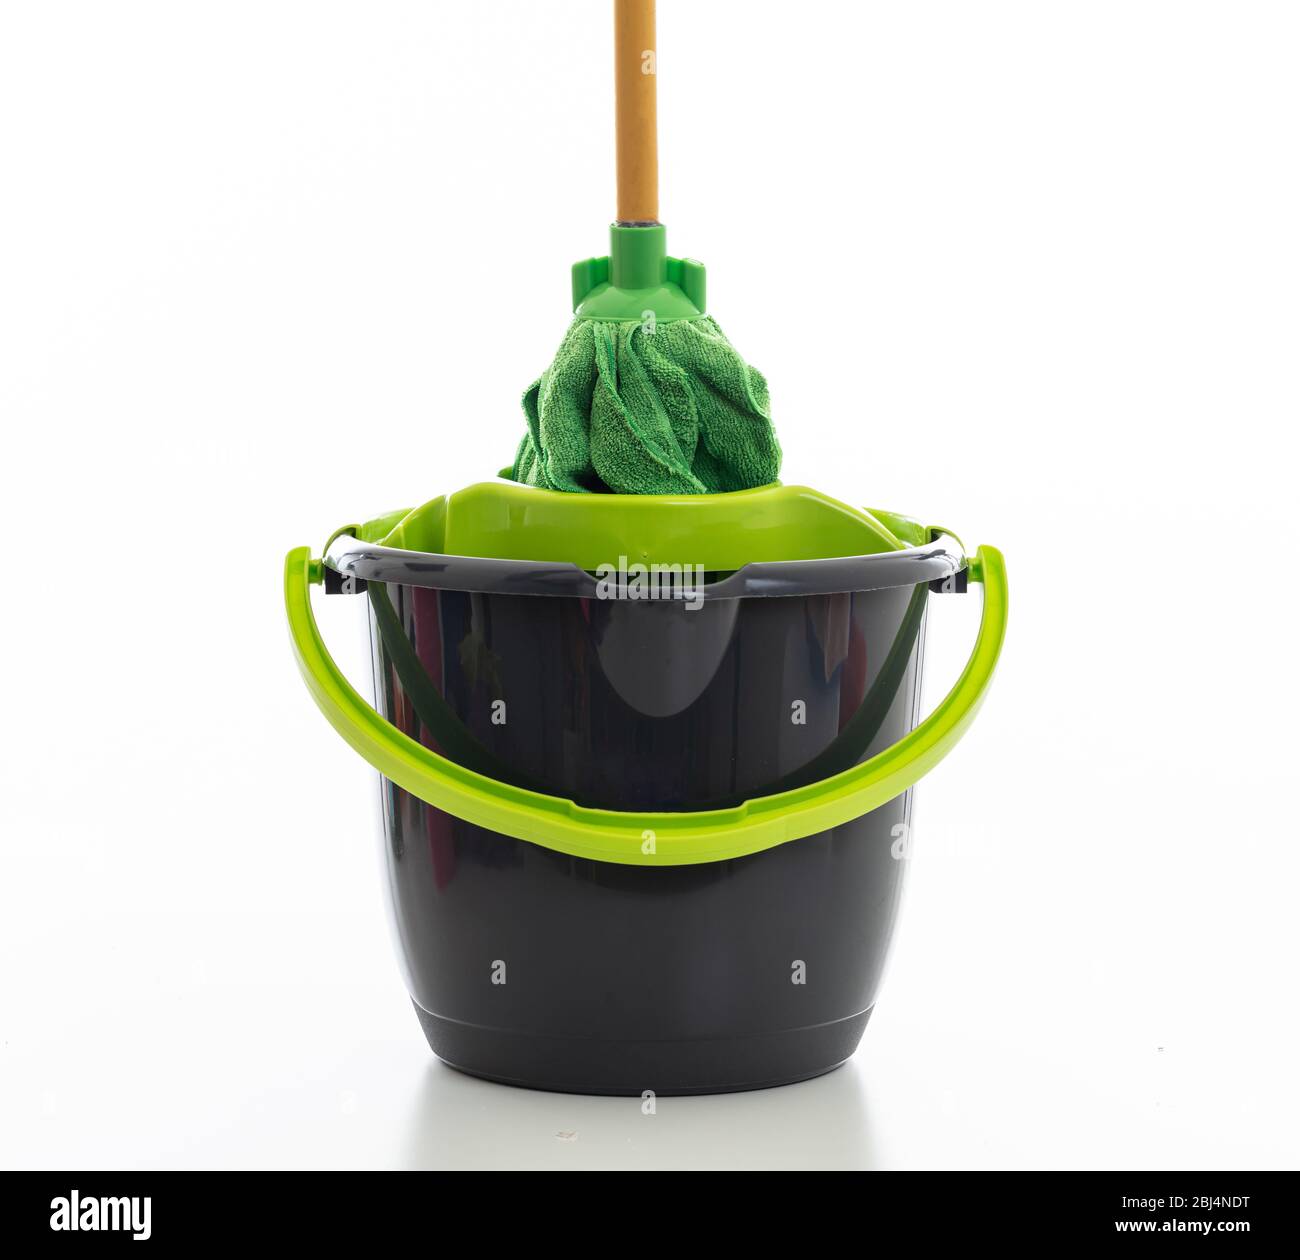 Bucket with dust wiper, sponges, chemicals bottles and mopping stick on the  floor in the apartment. Cleaning service concept Stock Photo - Alamy